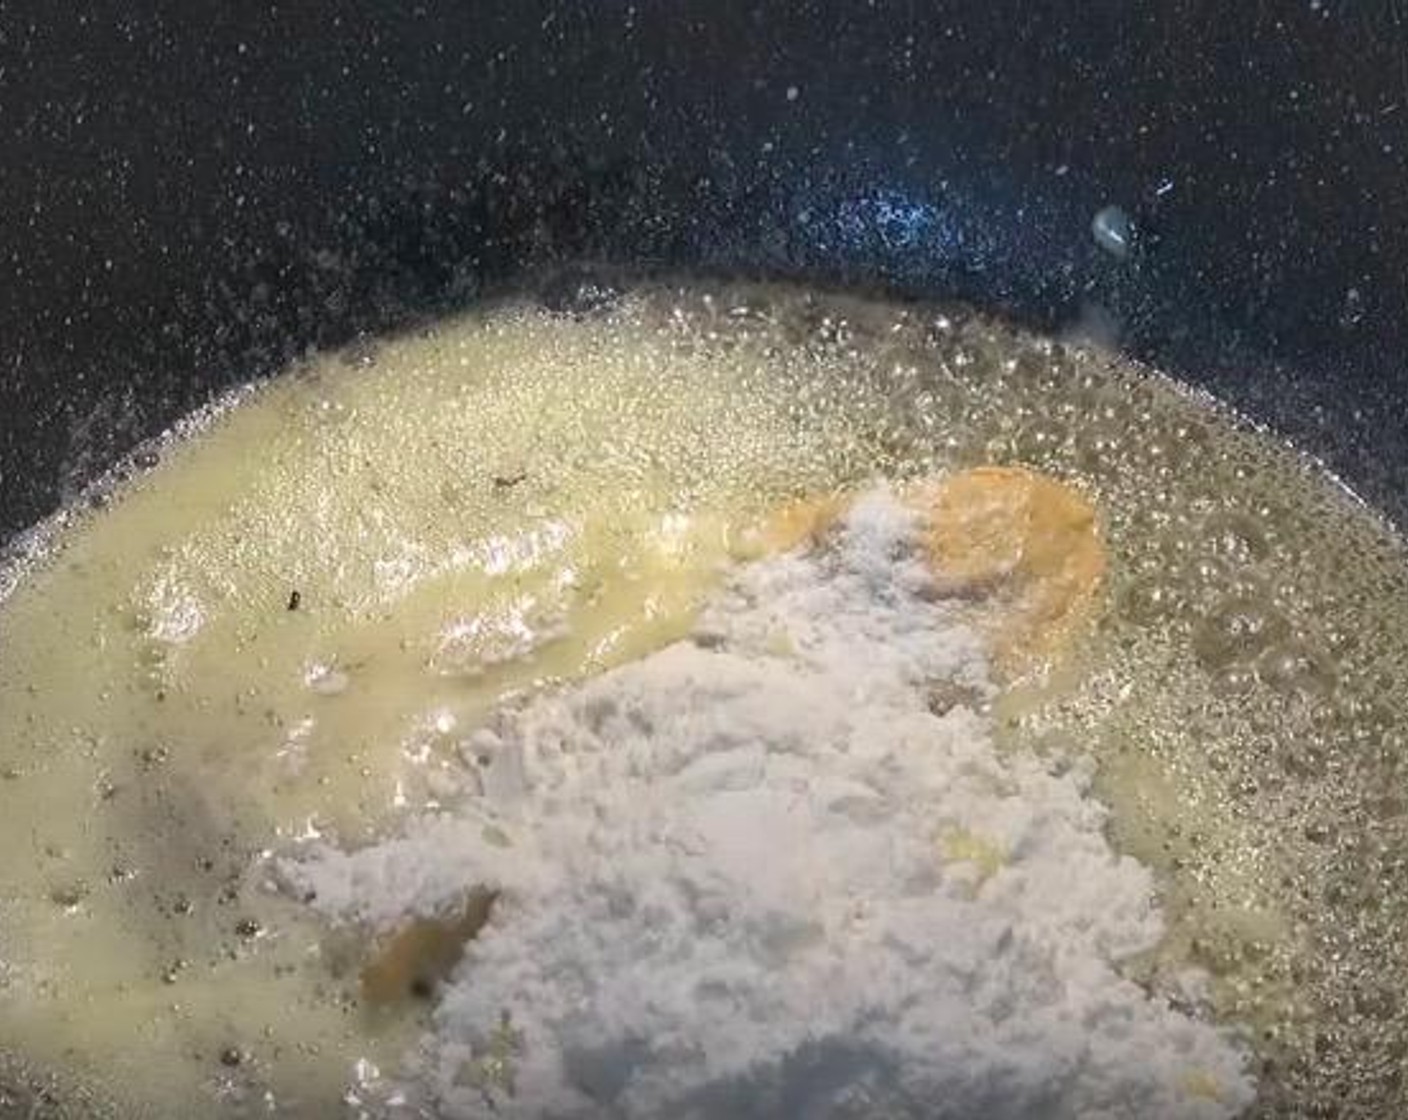 step 3 In a large pan, add Butter (1/4 cup). Once butter is melted, add in Dijon Mustard (1 tsp) and All-Purpose Flour (1/4 cup). Whisk together until it becomes a smooth paste.